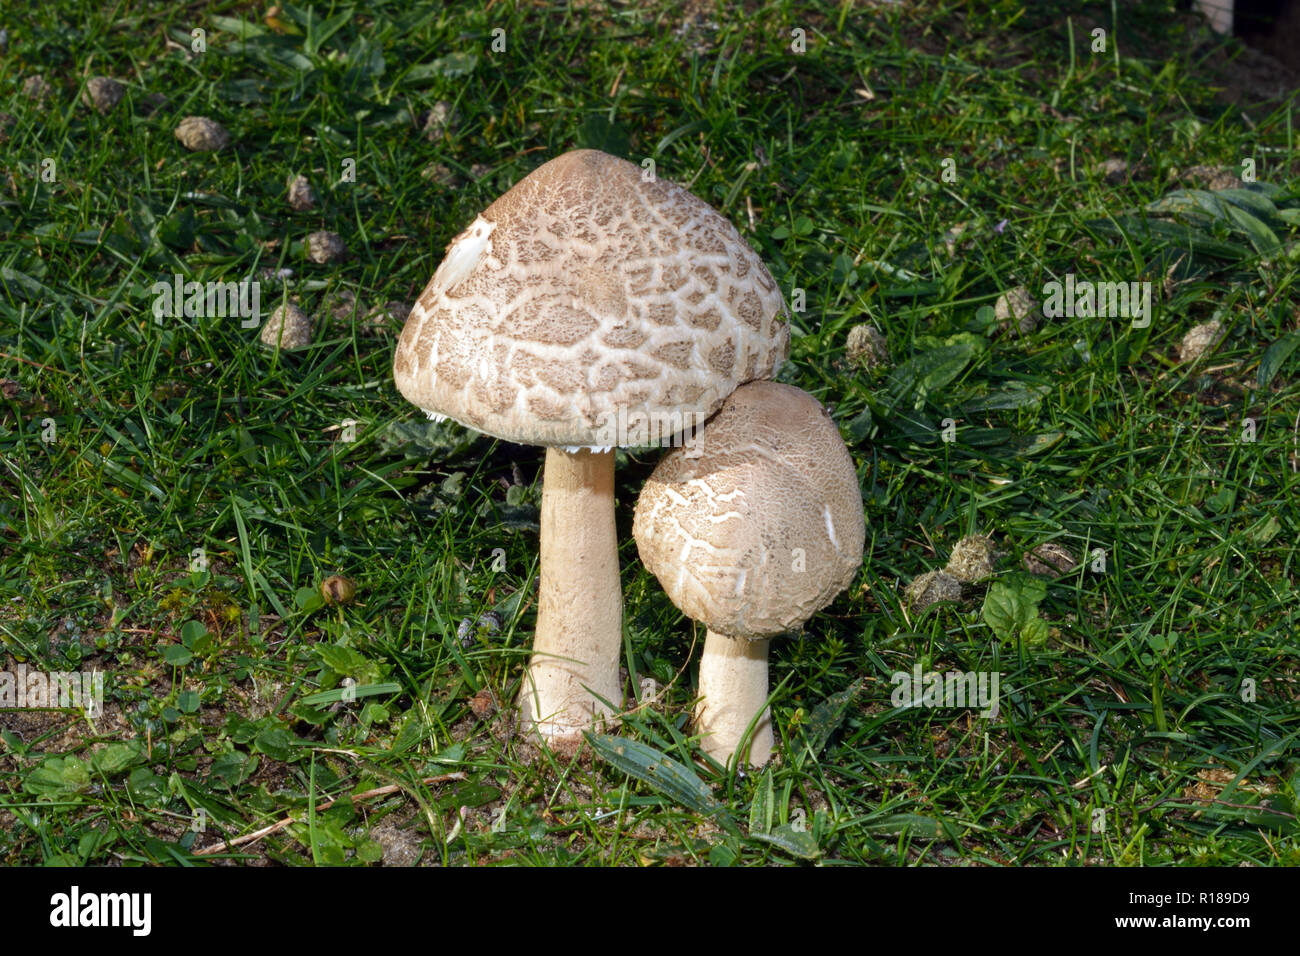 Macrolepiota konradii is a species of fungus or toadstool that can be found in pastureland but is here growing in dune grassland. Stock Photo